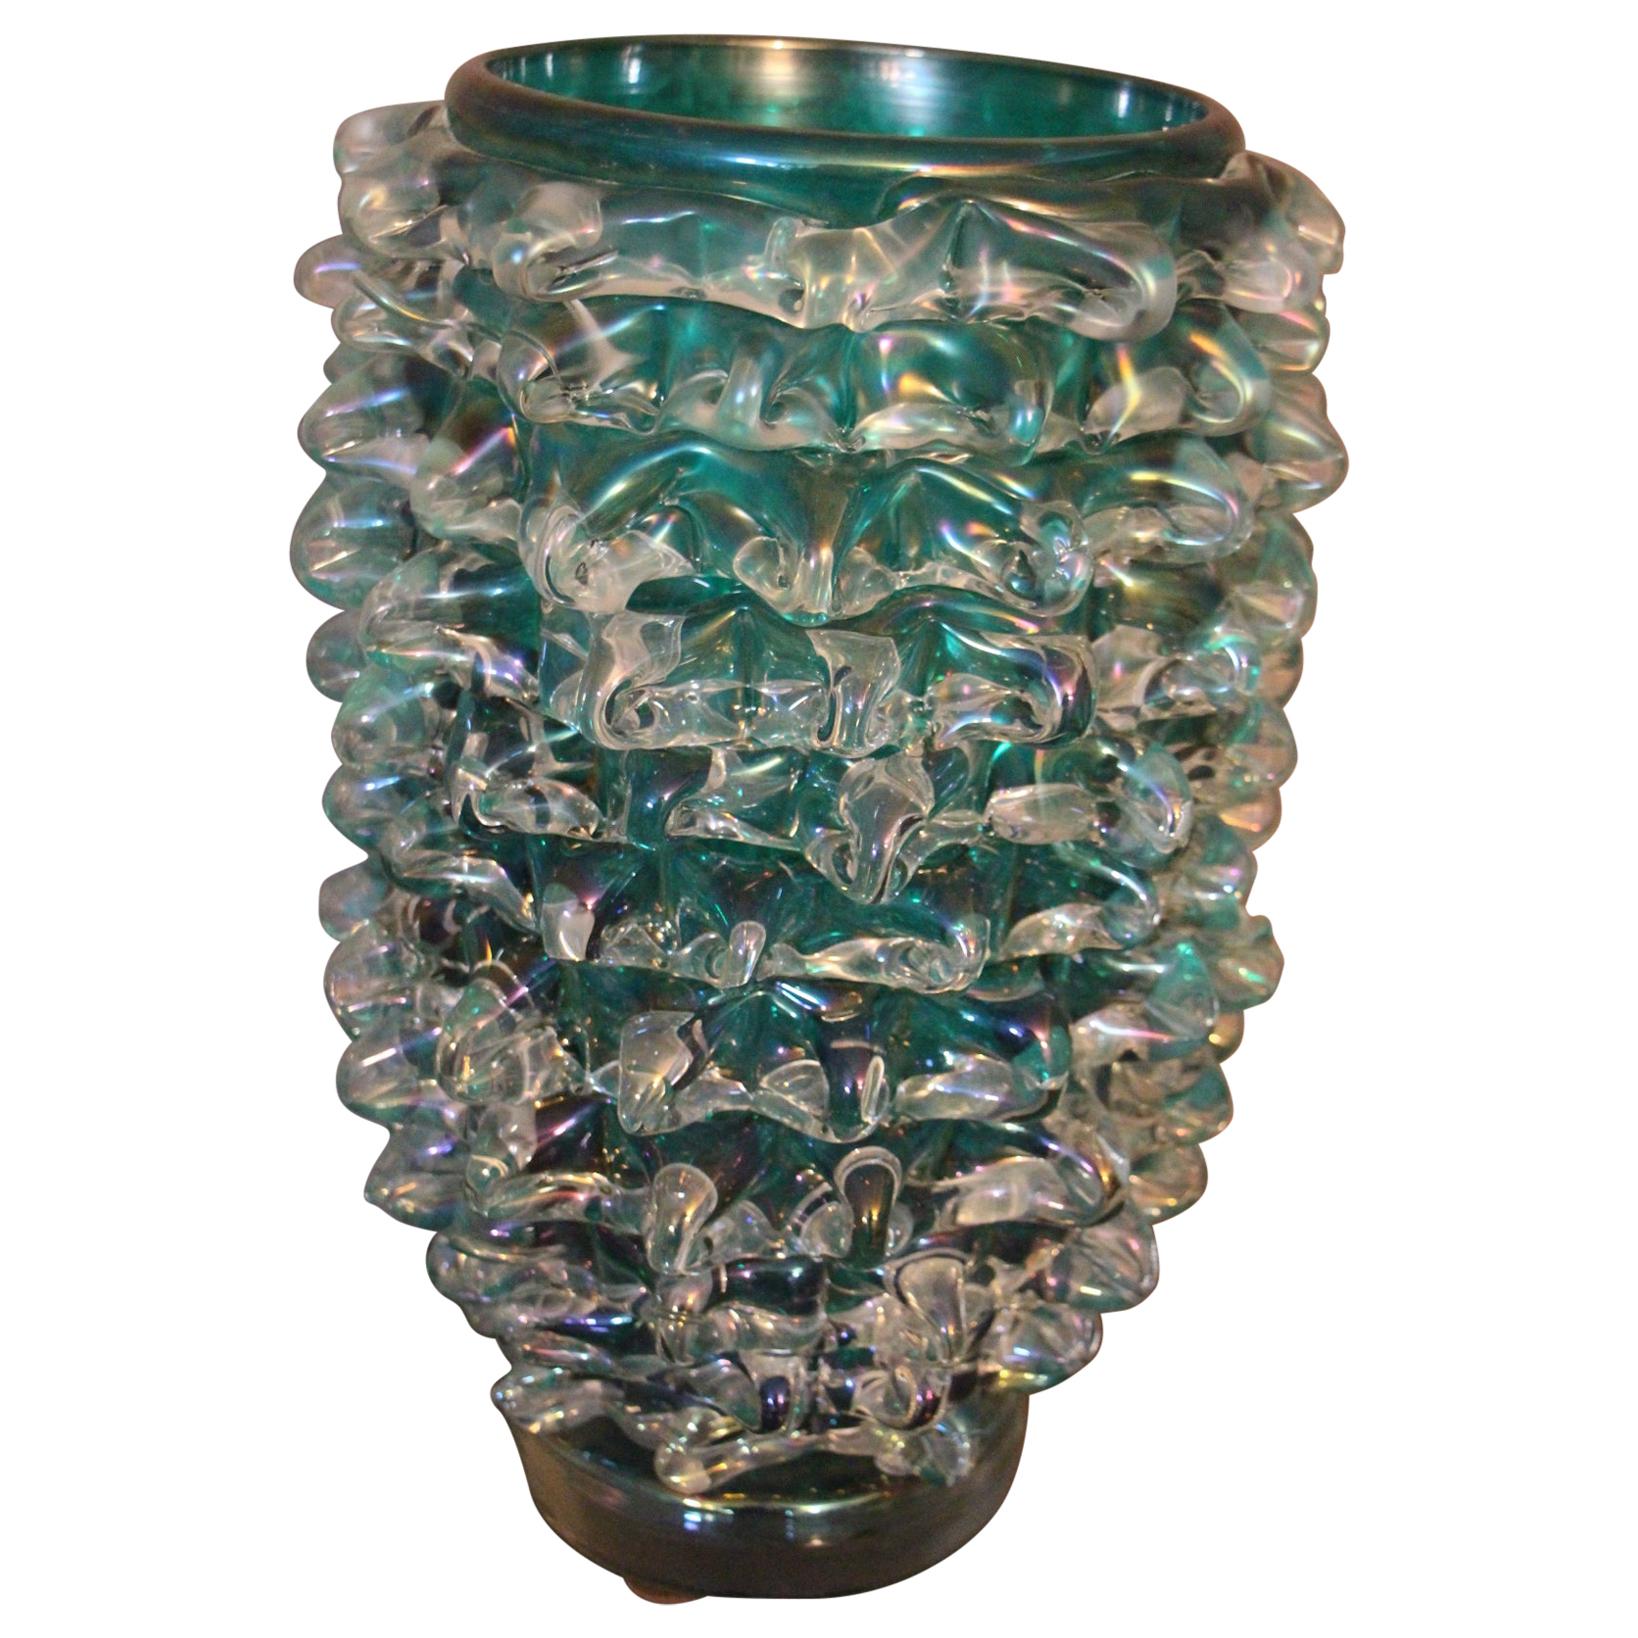 Tall Vase in Blue-Green Iridescent Murano Glass with Rostrato Spikes Decor